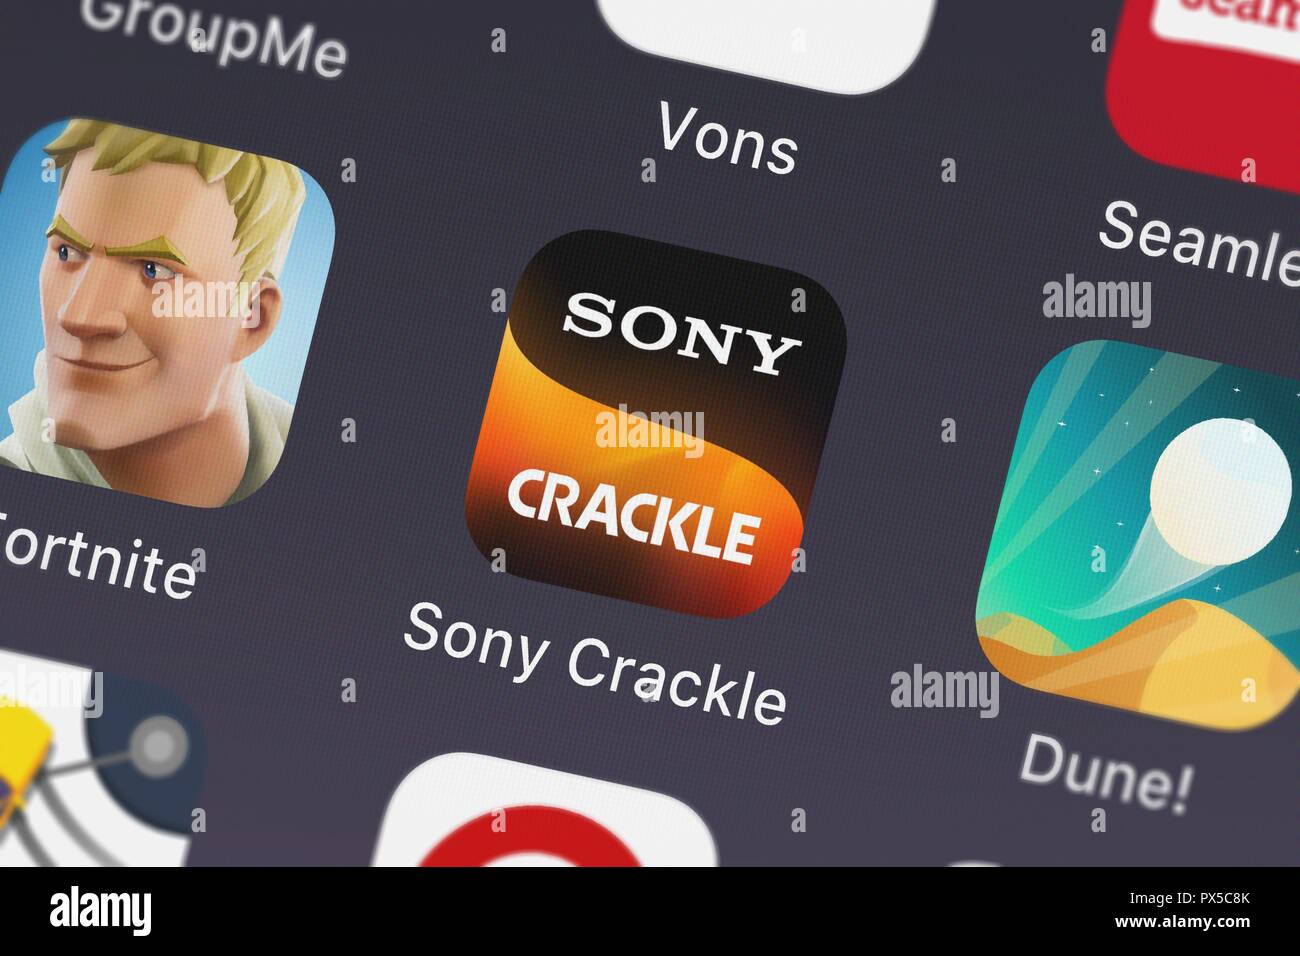 London, United Kingdom - October 19, 2018: Screenshot of the mobile app Sony Crackle from Sony Pictures Television. Stock Photo